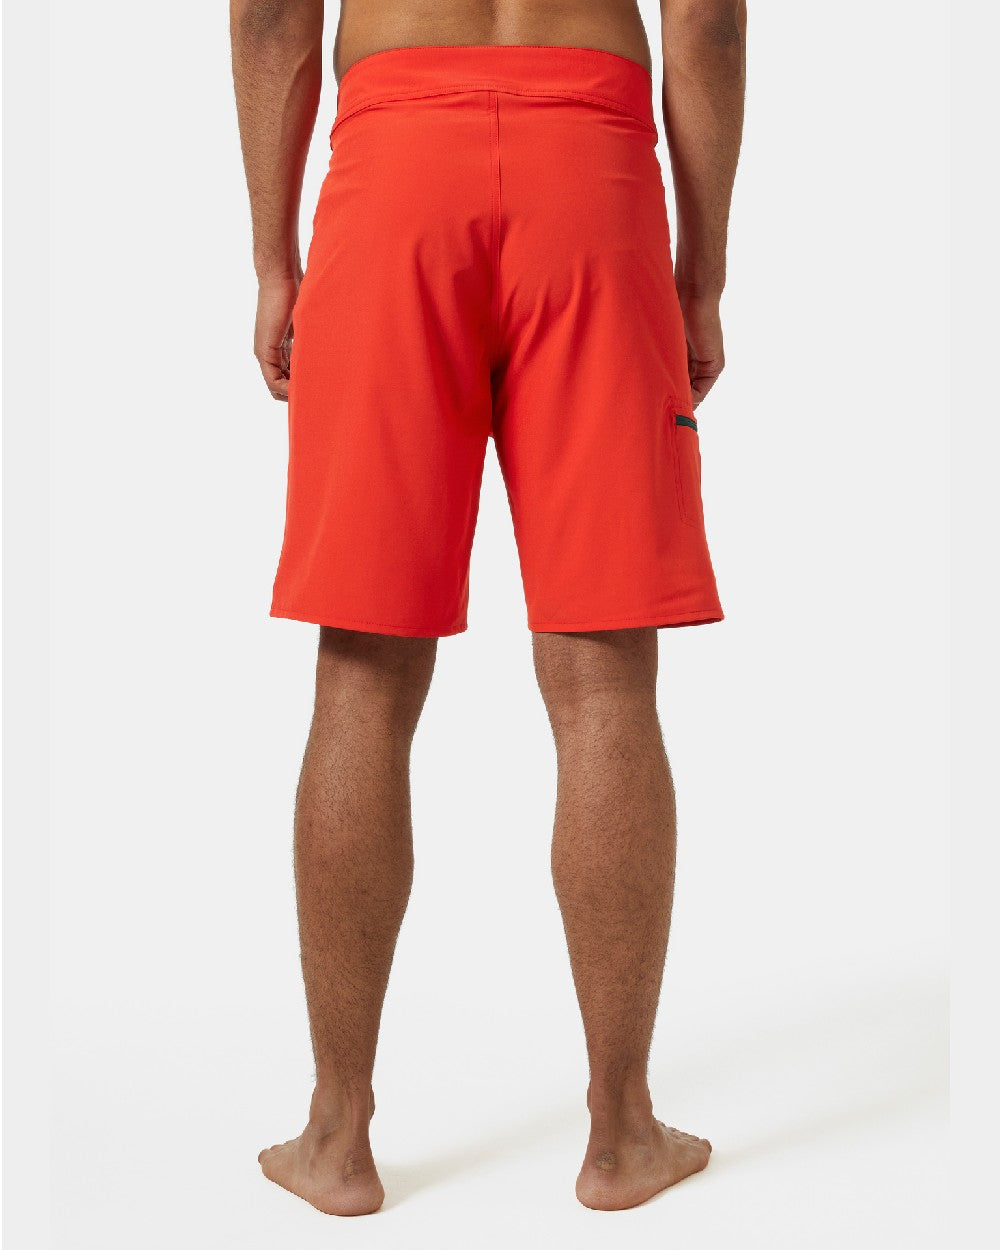 Alert Red Coloured Helly Hansen Mens HP 9 inch Board Shorts 3.0 on grey background 